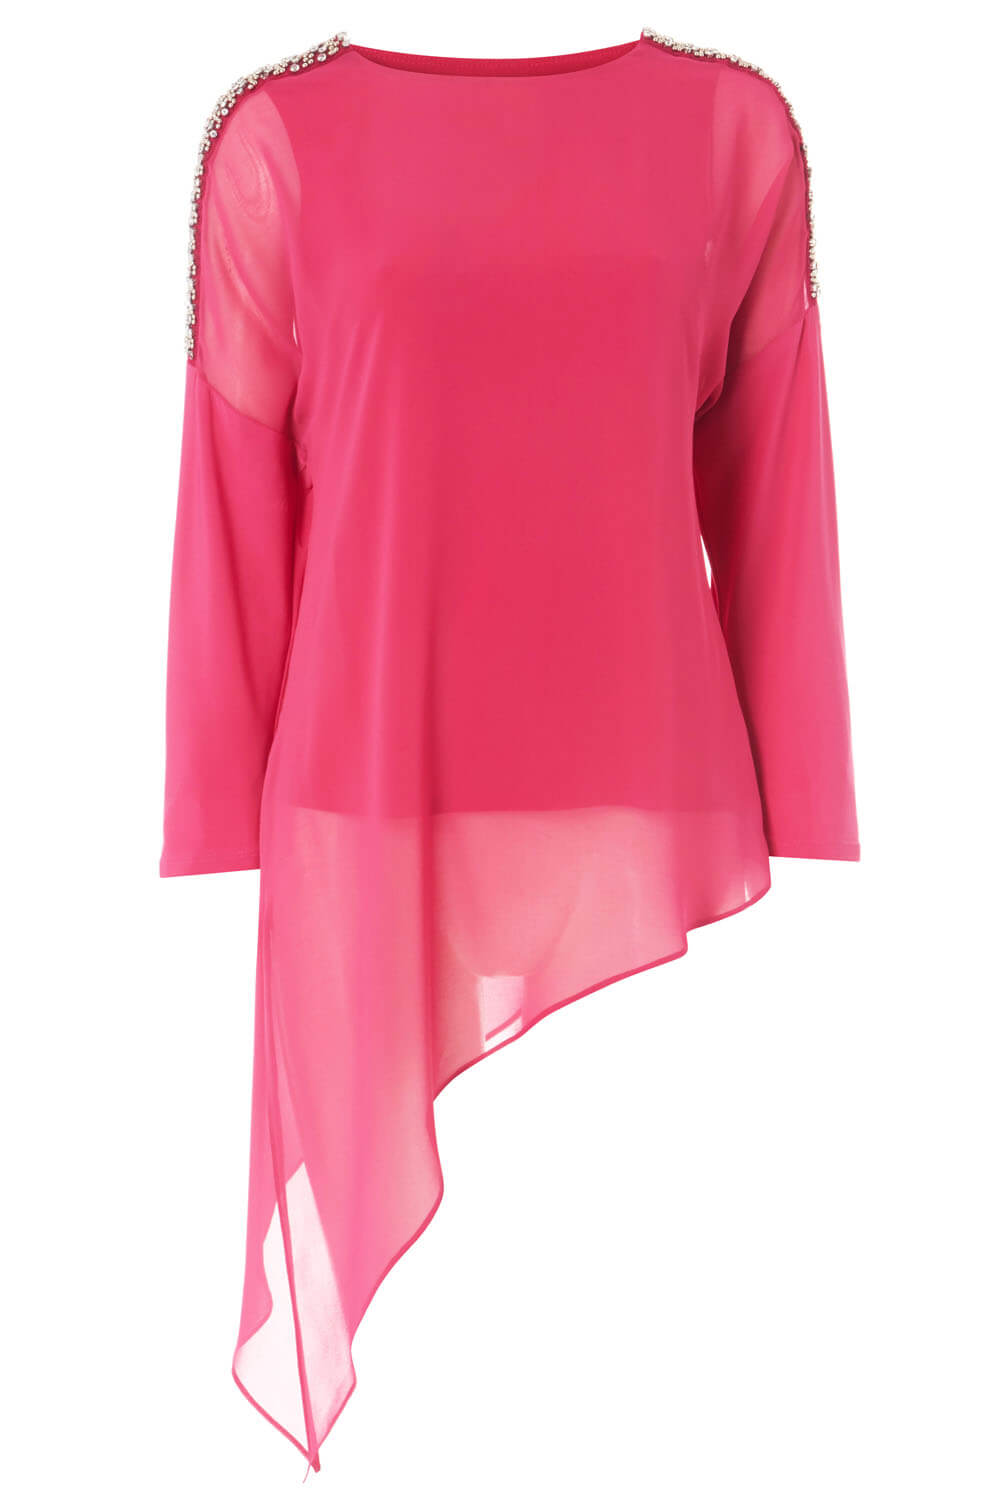 PINK Sparkle Trim Asymmetric Overlay Top, Image 5 of 5